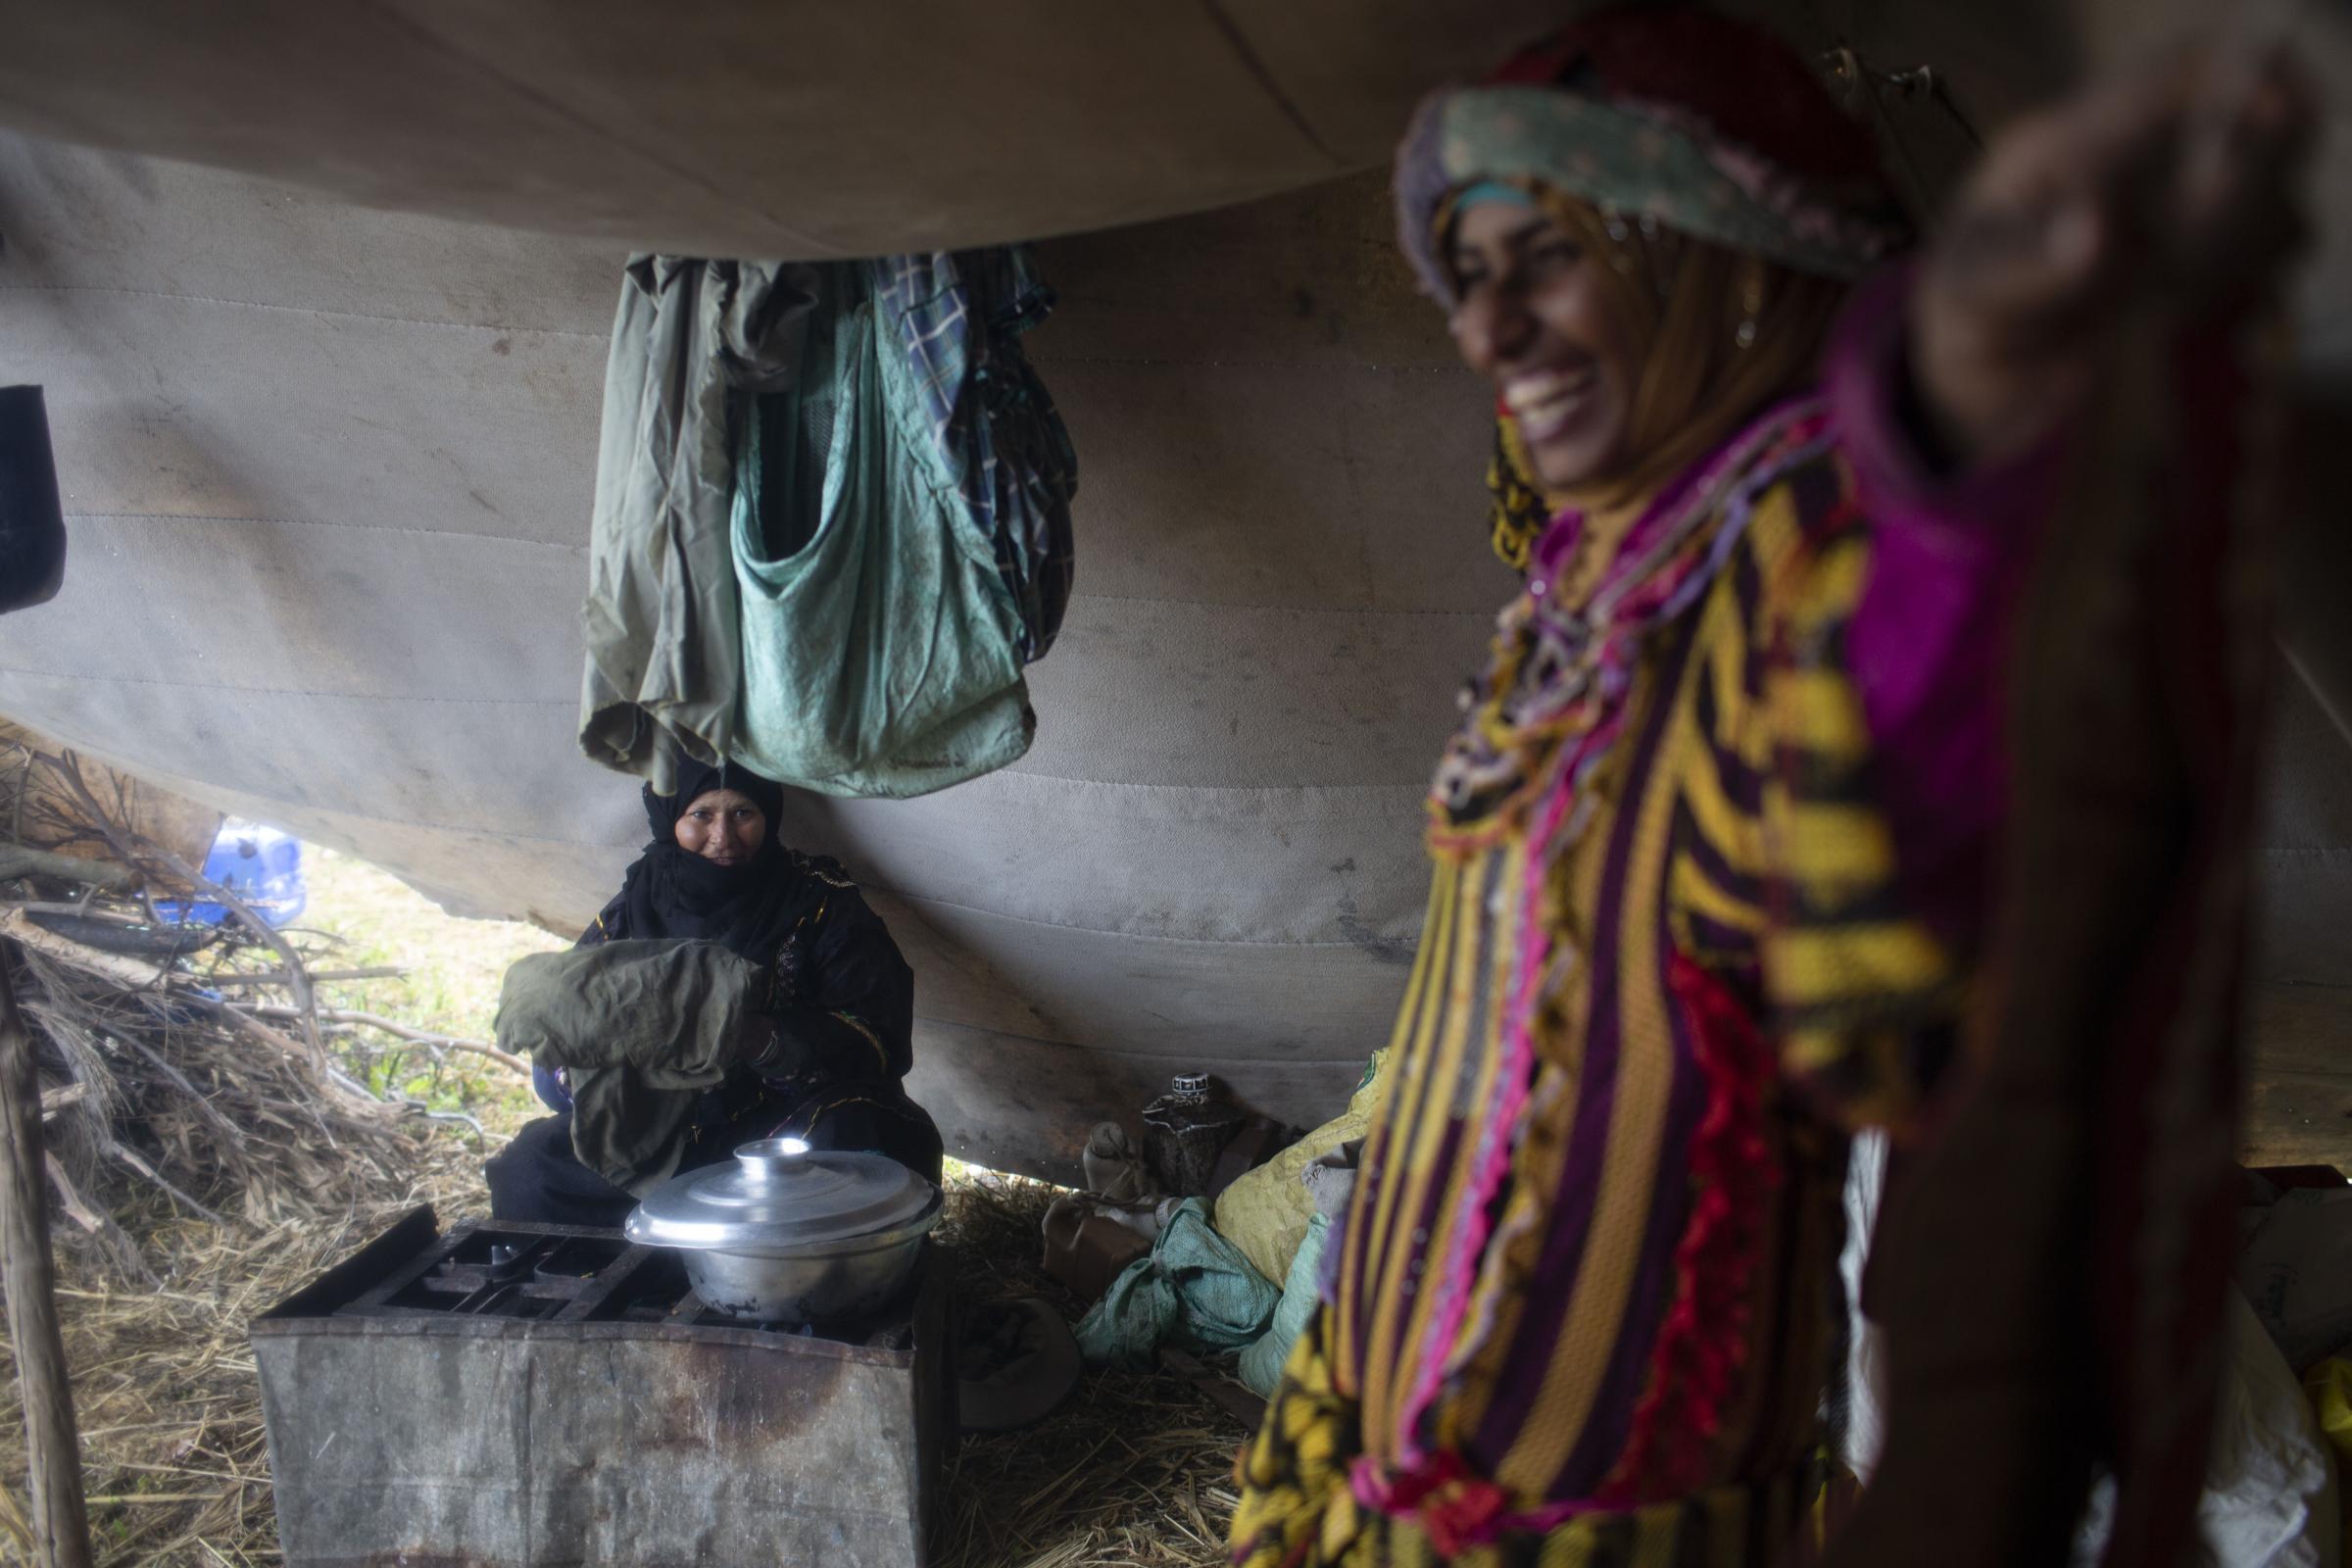 Nomadic Bedouins set up camp by the housing blocks of Egypt's Nile Delta - 